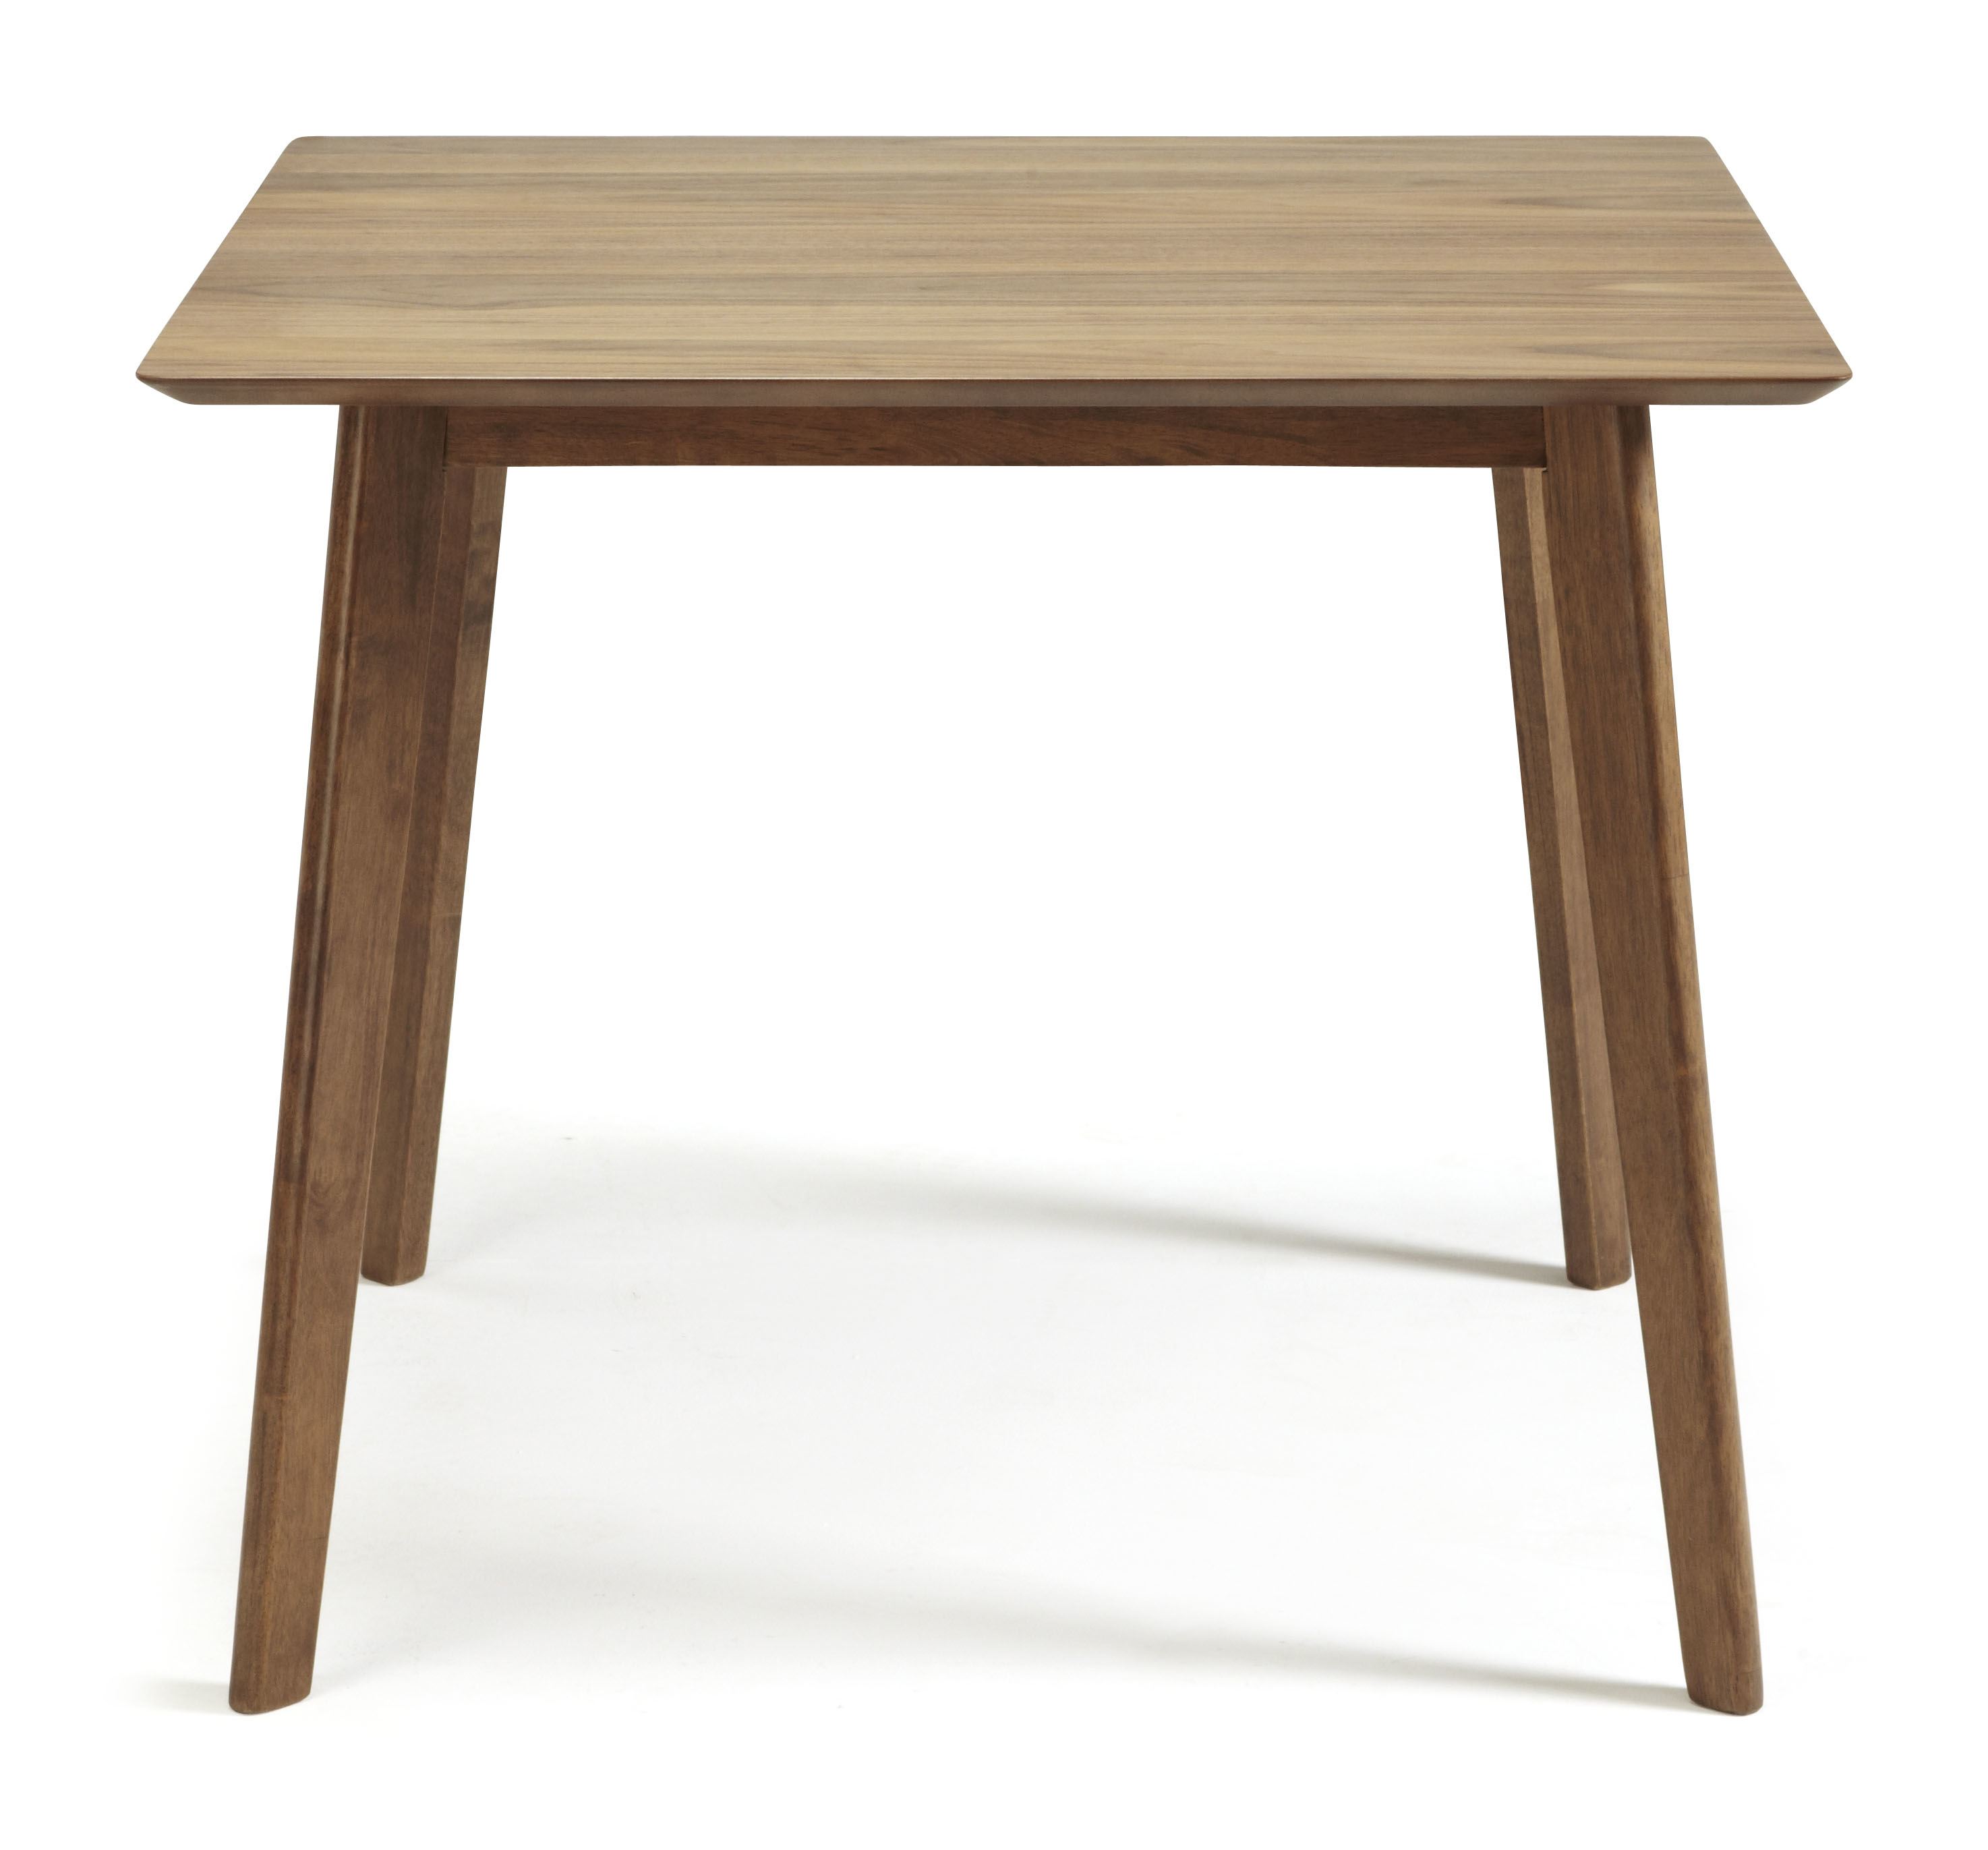 Minster 2 Seat Dining Table